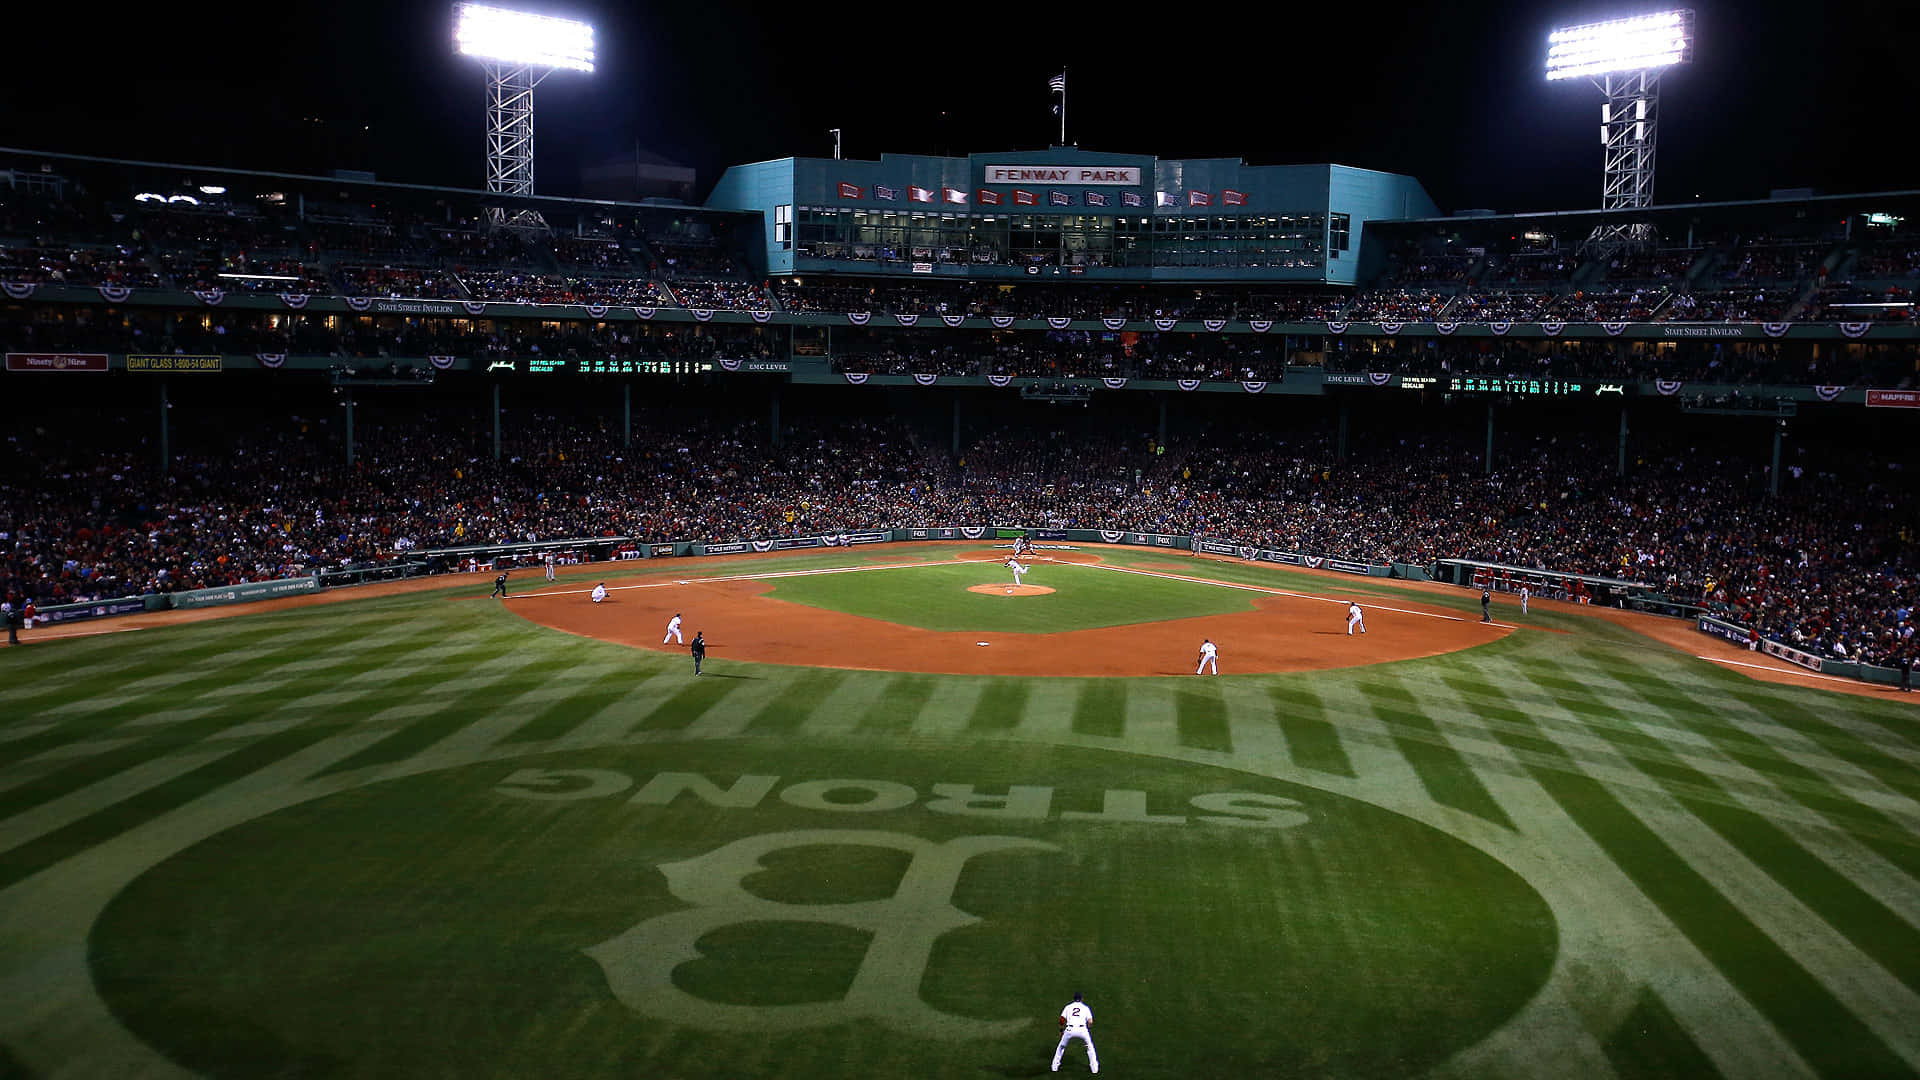 Enjoy the view of Fenway Park from the stands Wallpaper